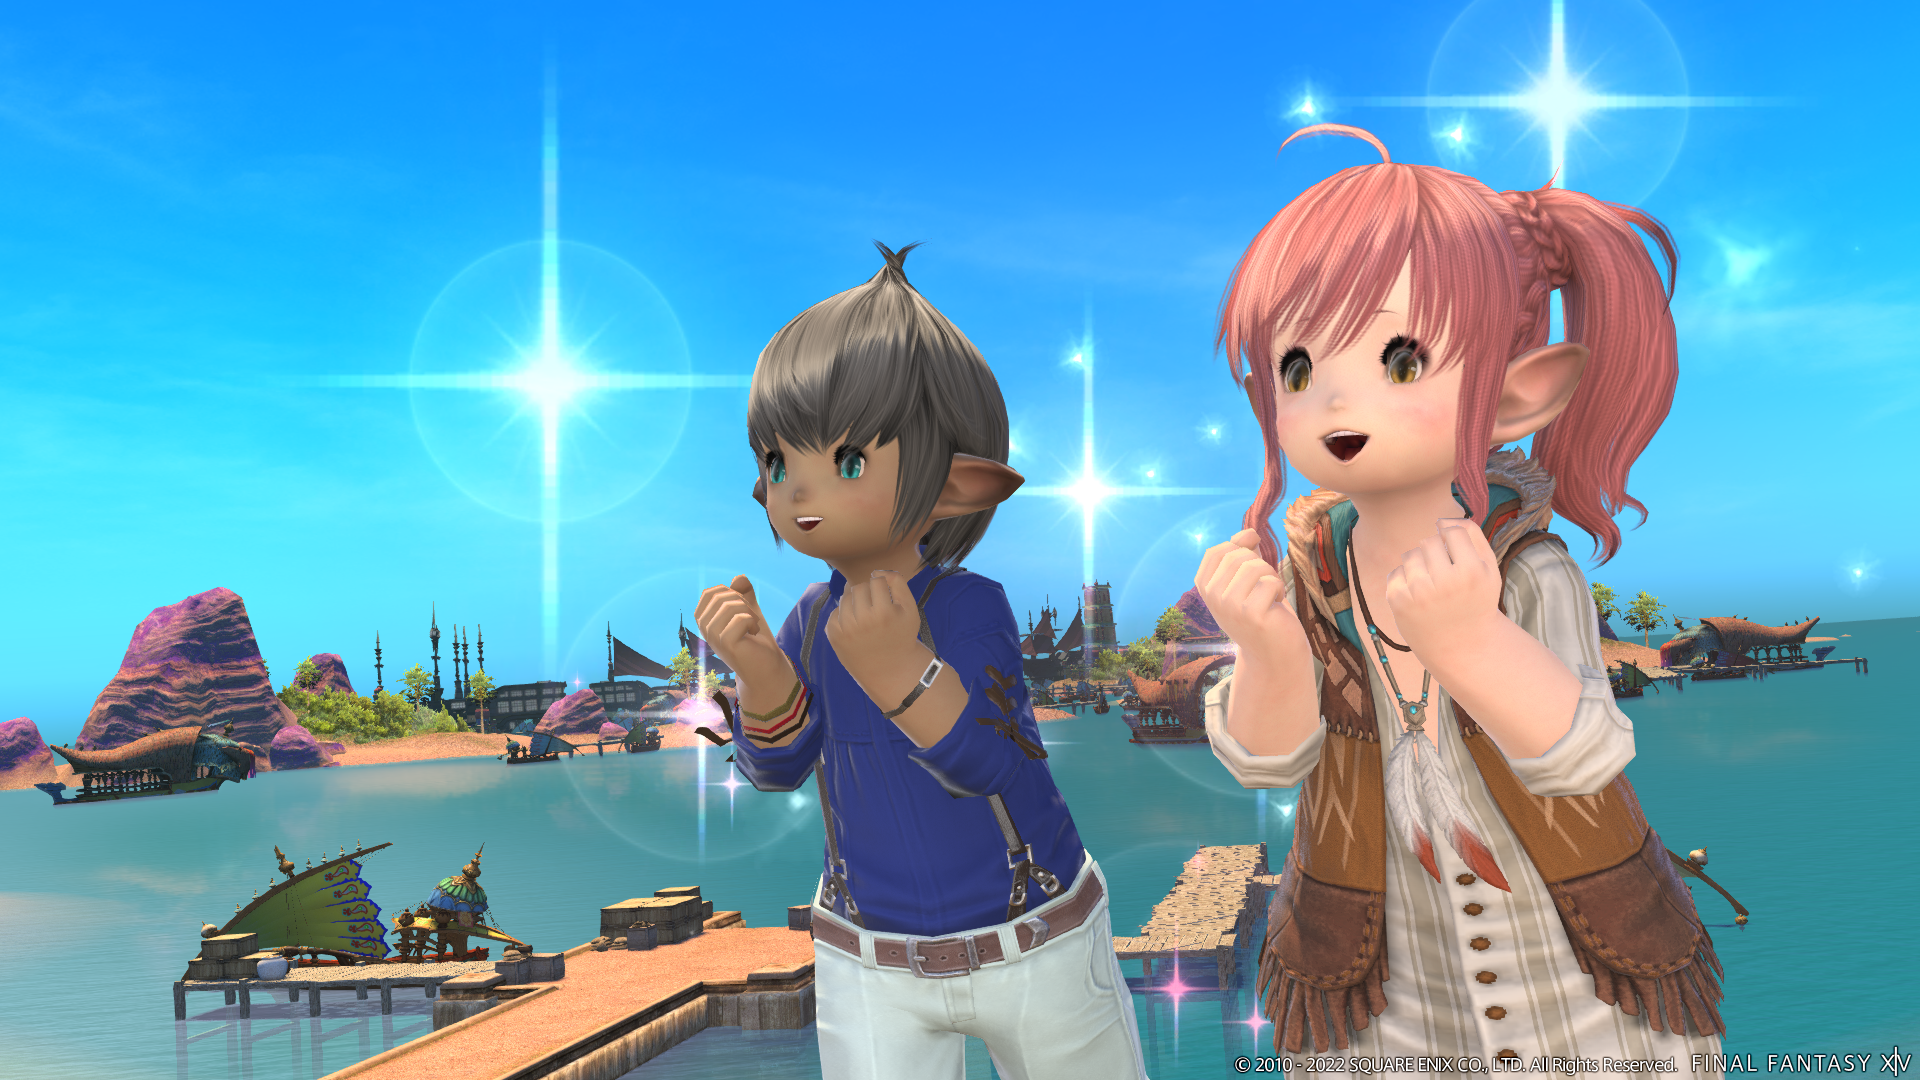 Hairstyles - Final Fantasy XIV Online Wiki - FFXIV / FF14 Online Community  Wiki and Guide